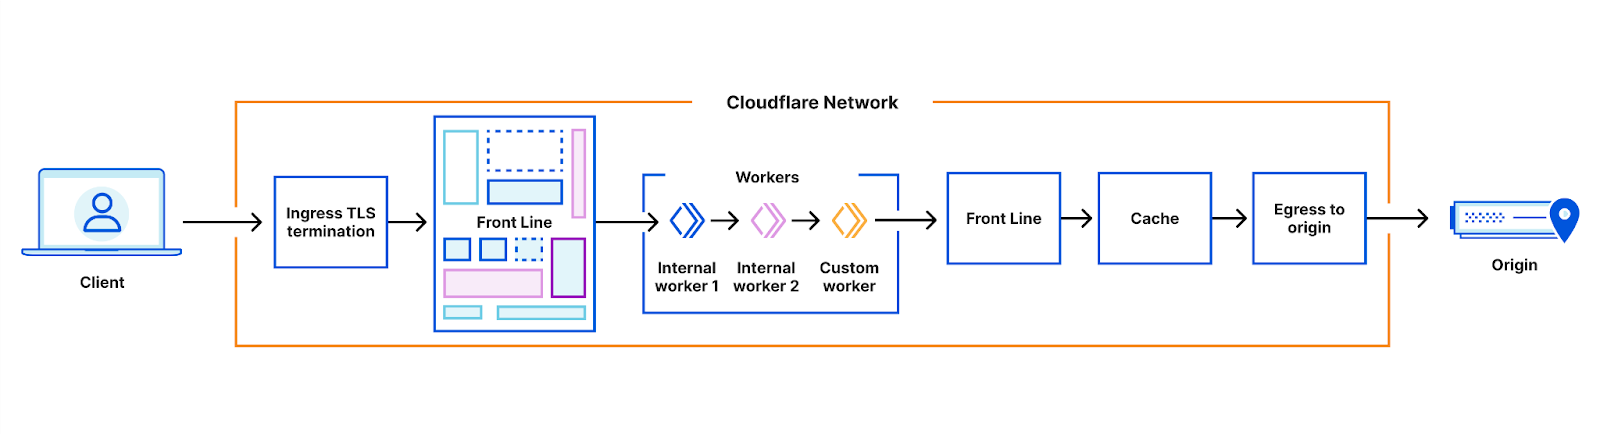 A request flows through multiple services as before, but the workers module includes a chain of internal workers before running customer workers